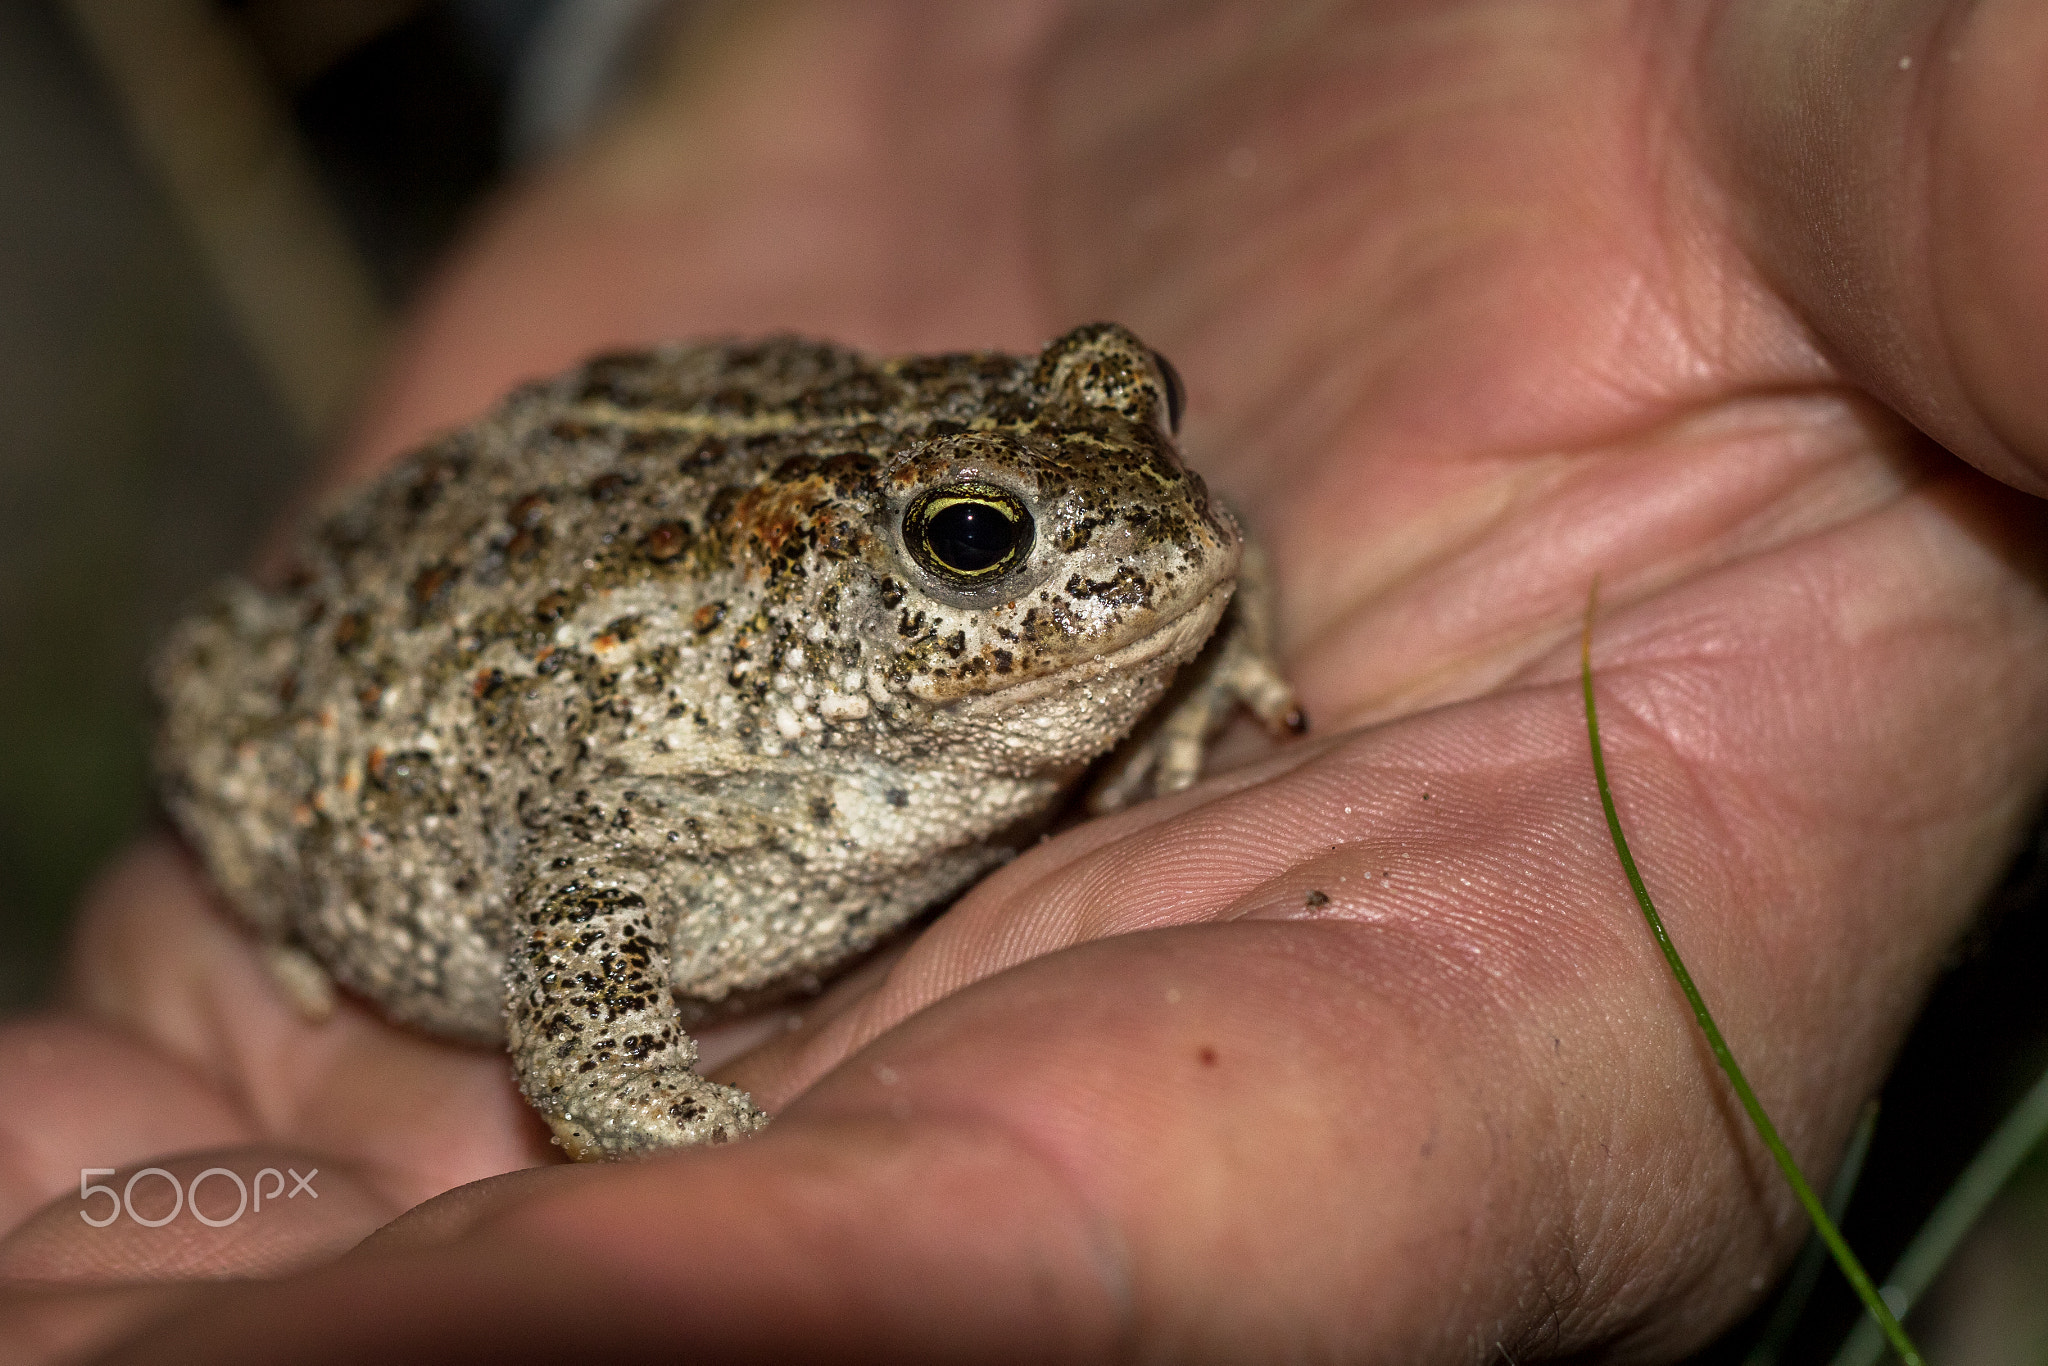 The natterjack toad, Bufo calamita, sitting in a mans hand.